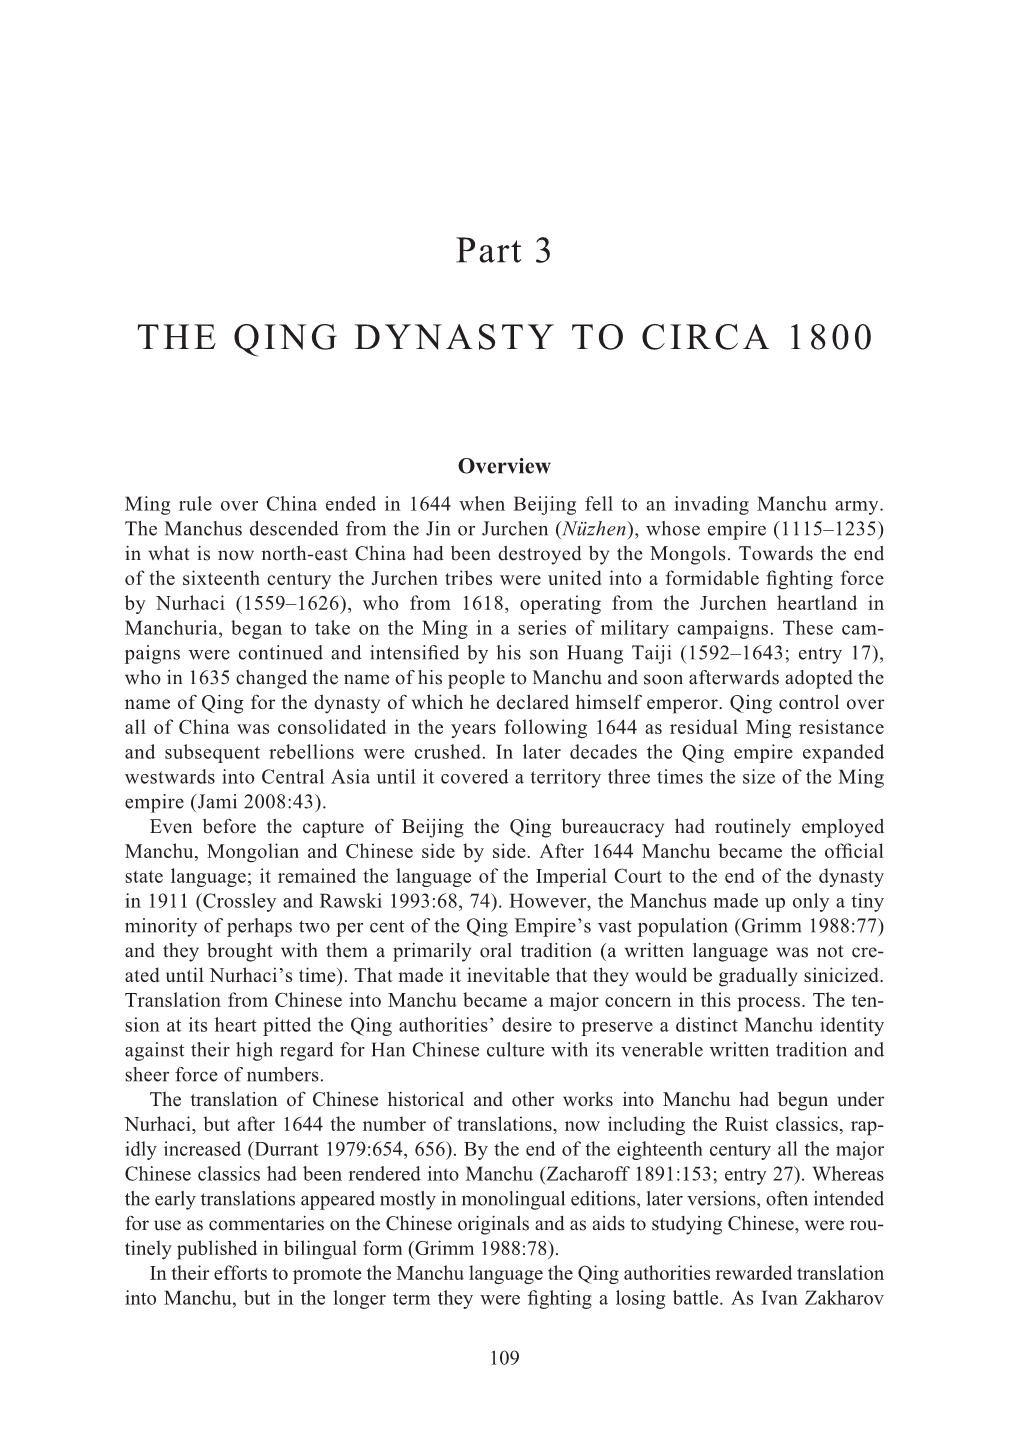 Part 3 the QING DYNASTY to CIRCA 1800